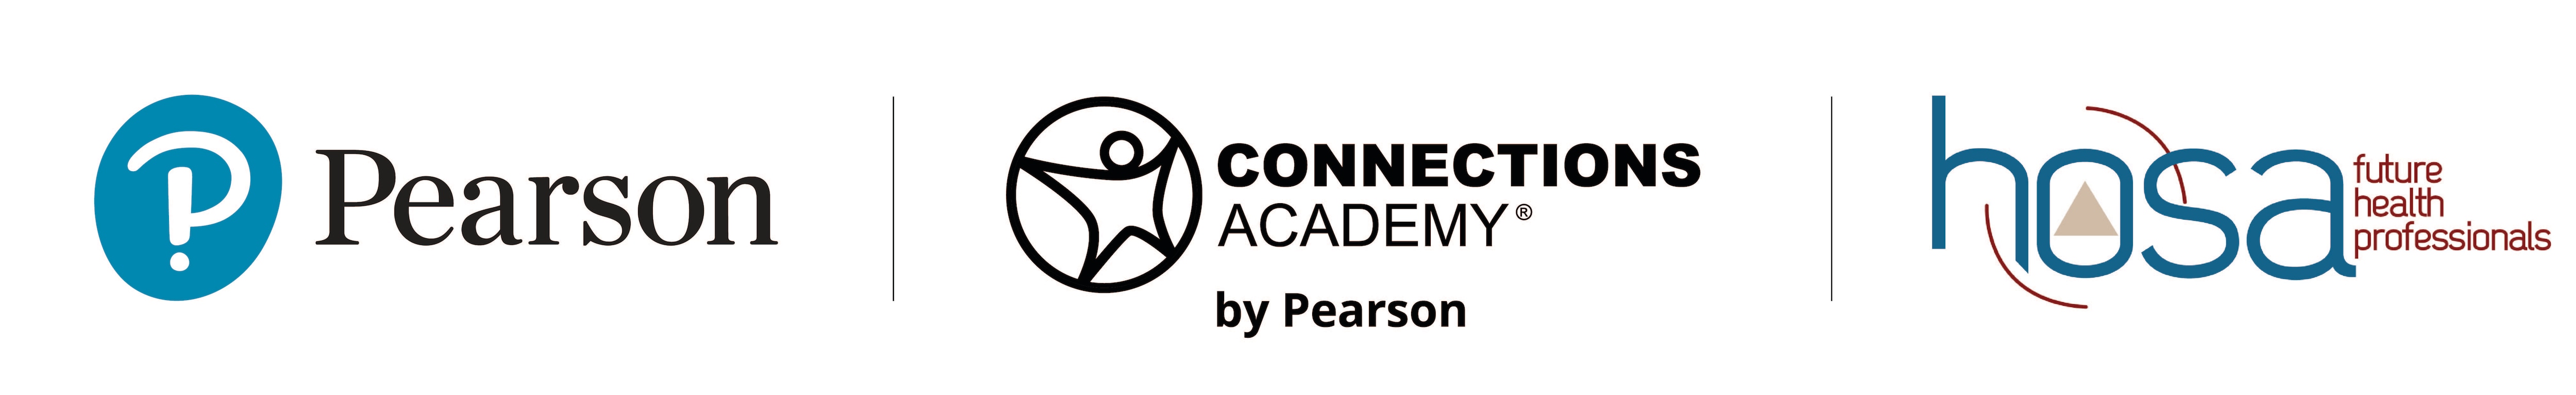 Pearson, Connections Academy, and HOSA logos